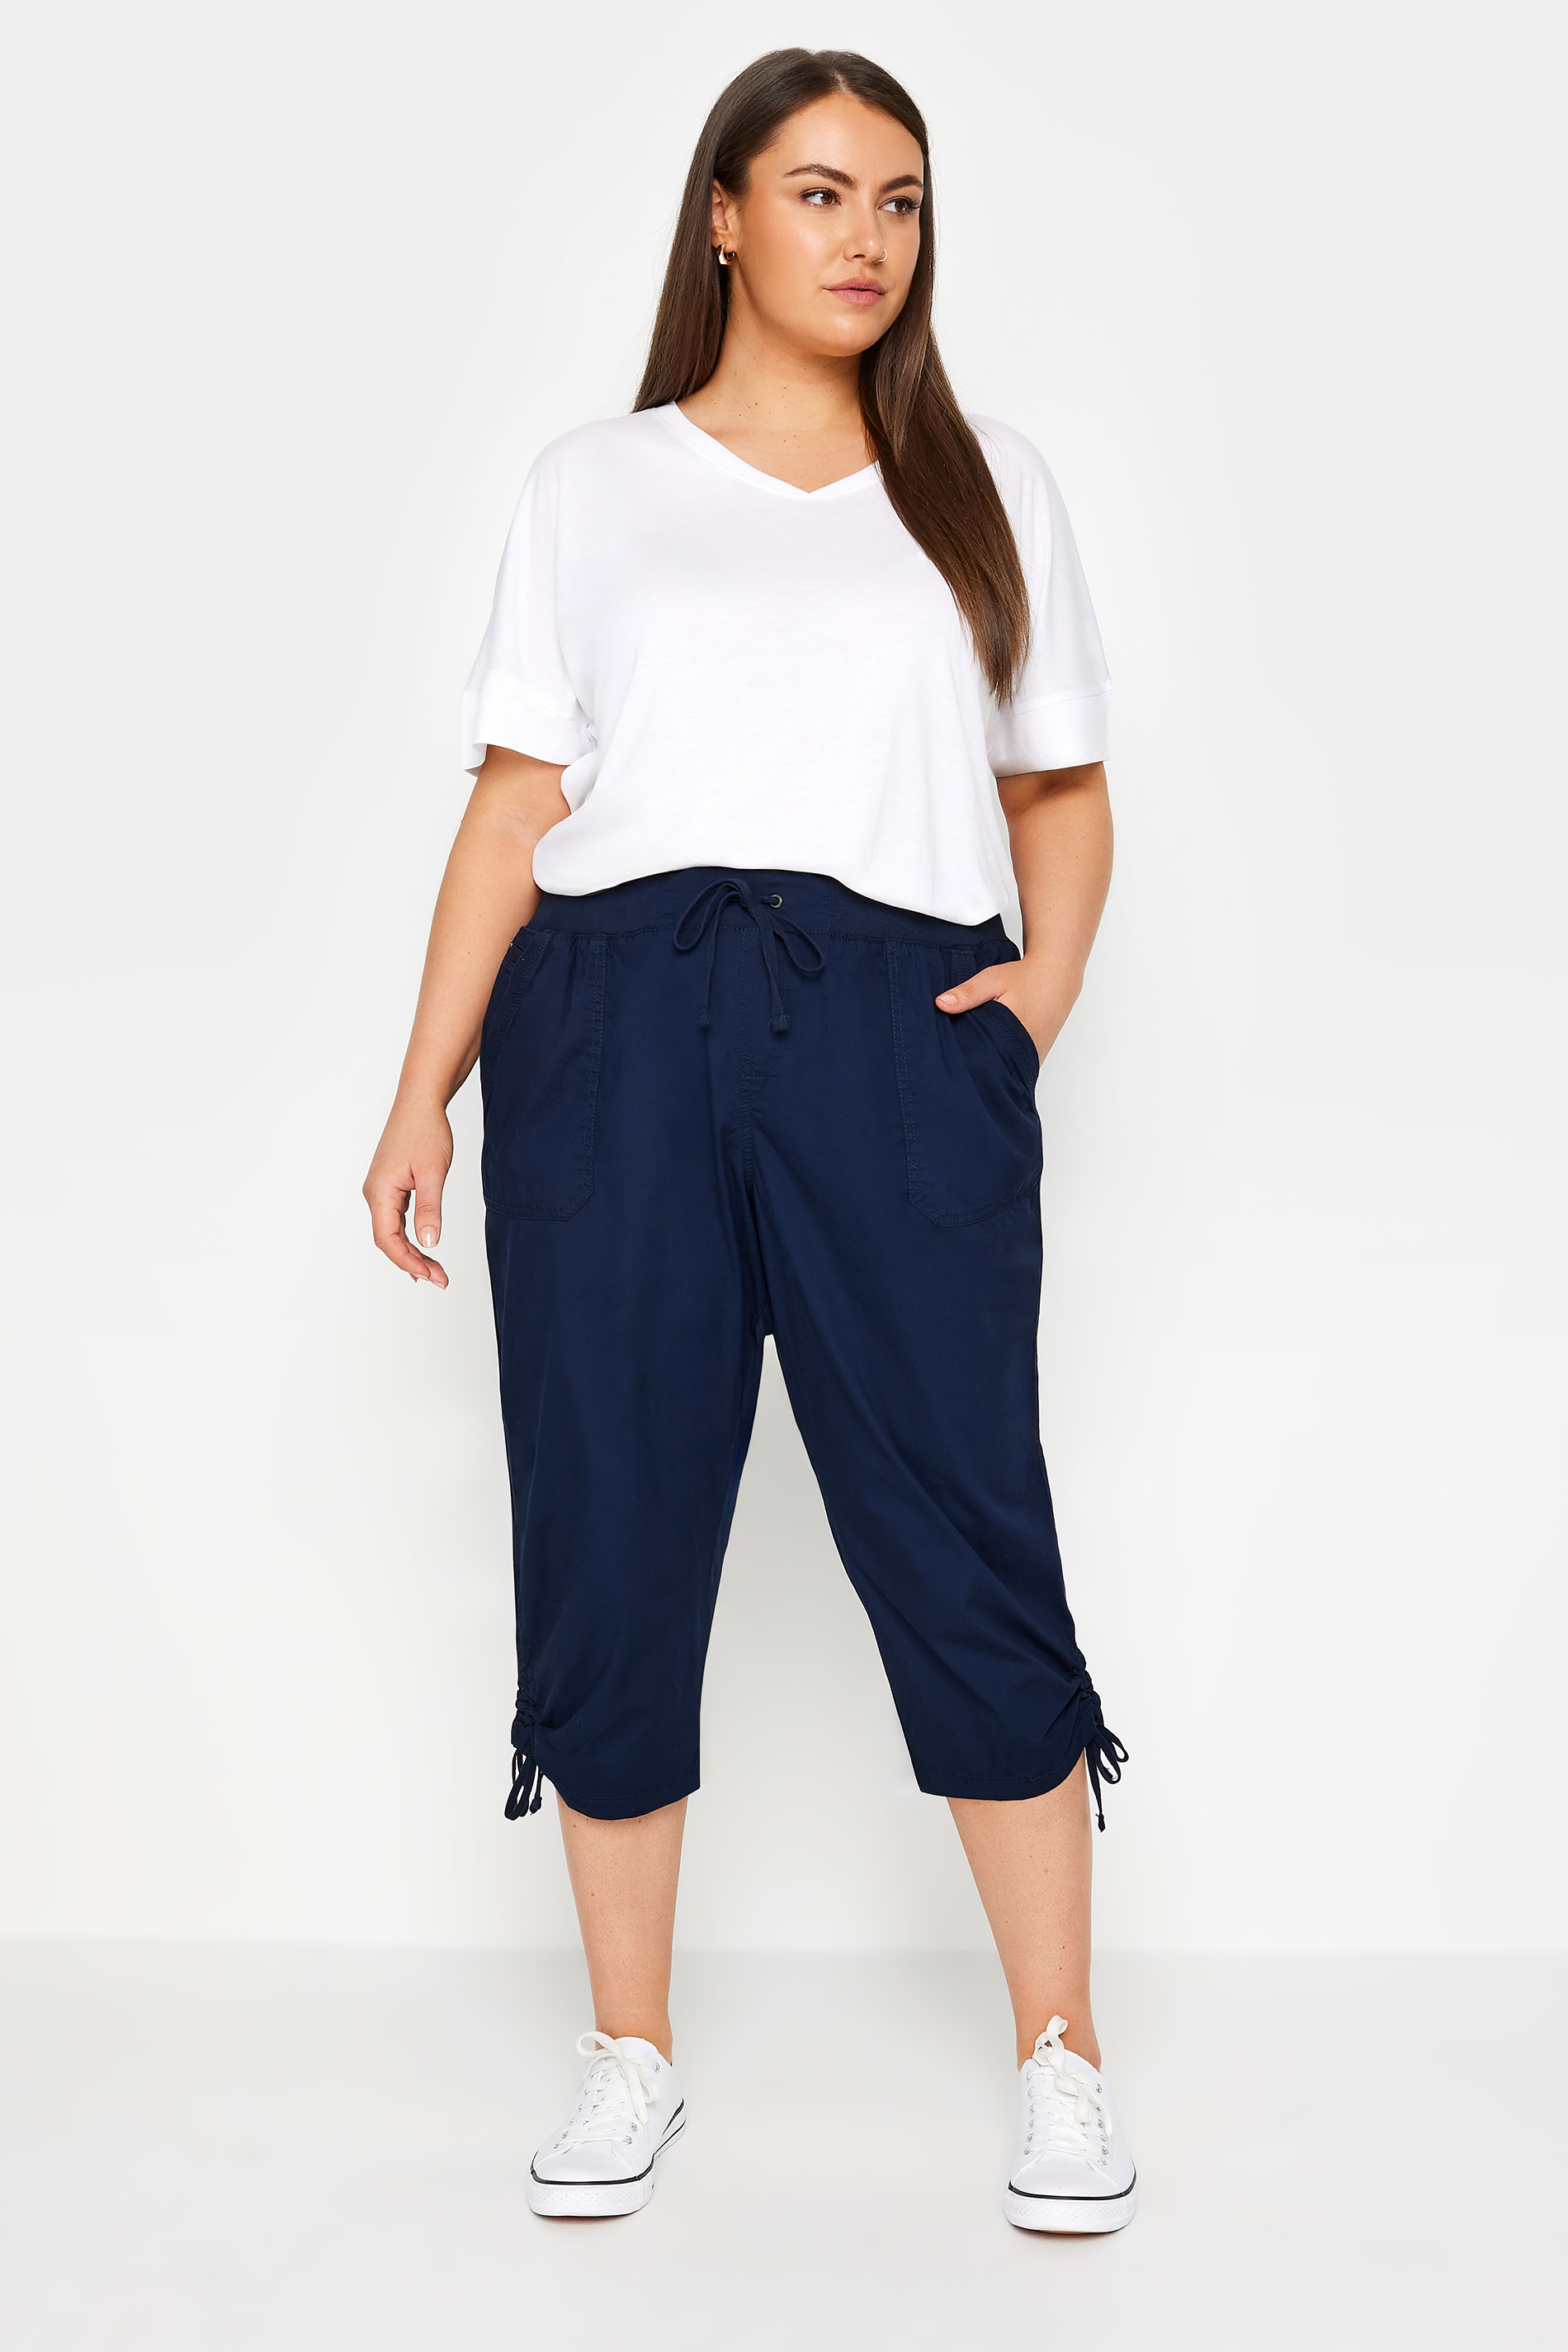 Evans Navy Blue Elasticated Waist Cropped Trousers 2